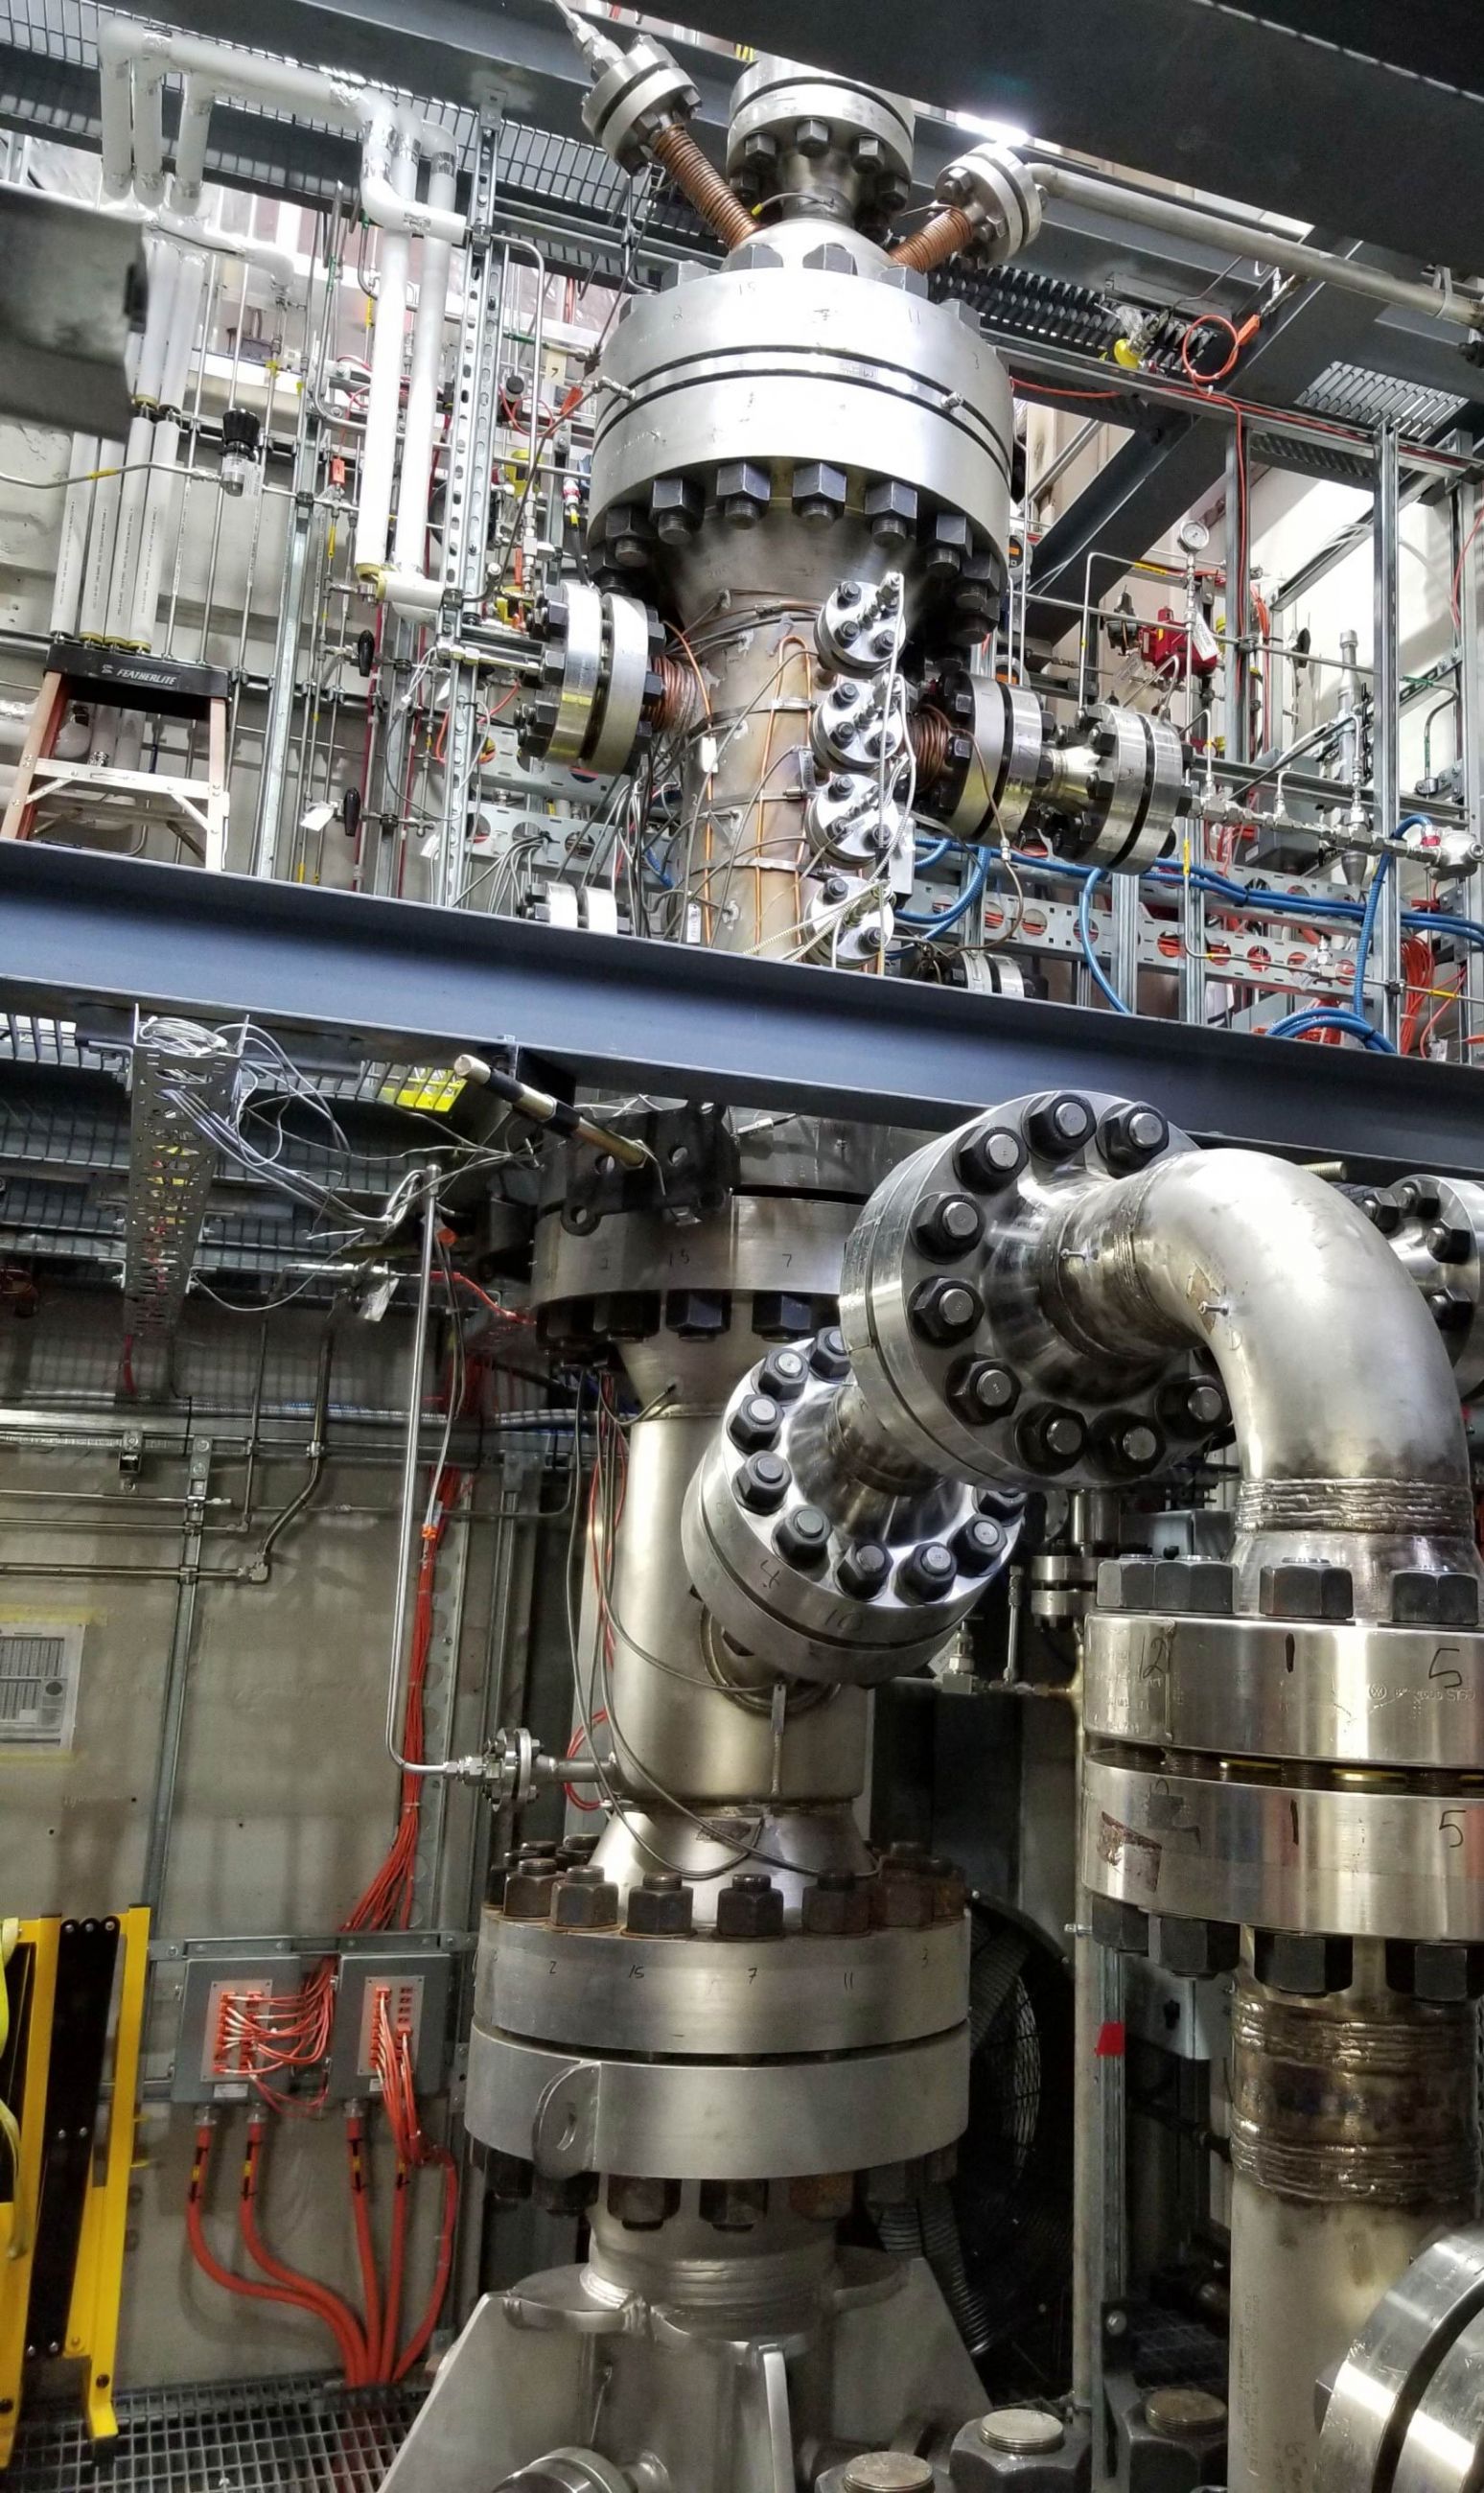 High-pressure oxy-fired reactor (down-fired, entrained flow) at CanmetENERGY Ottawa.